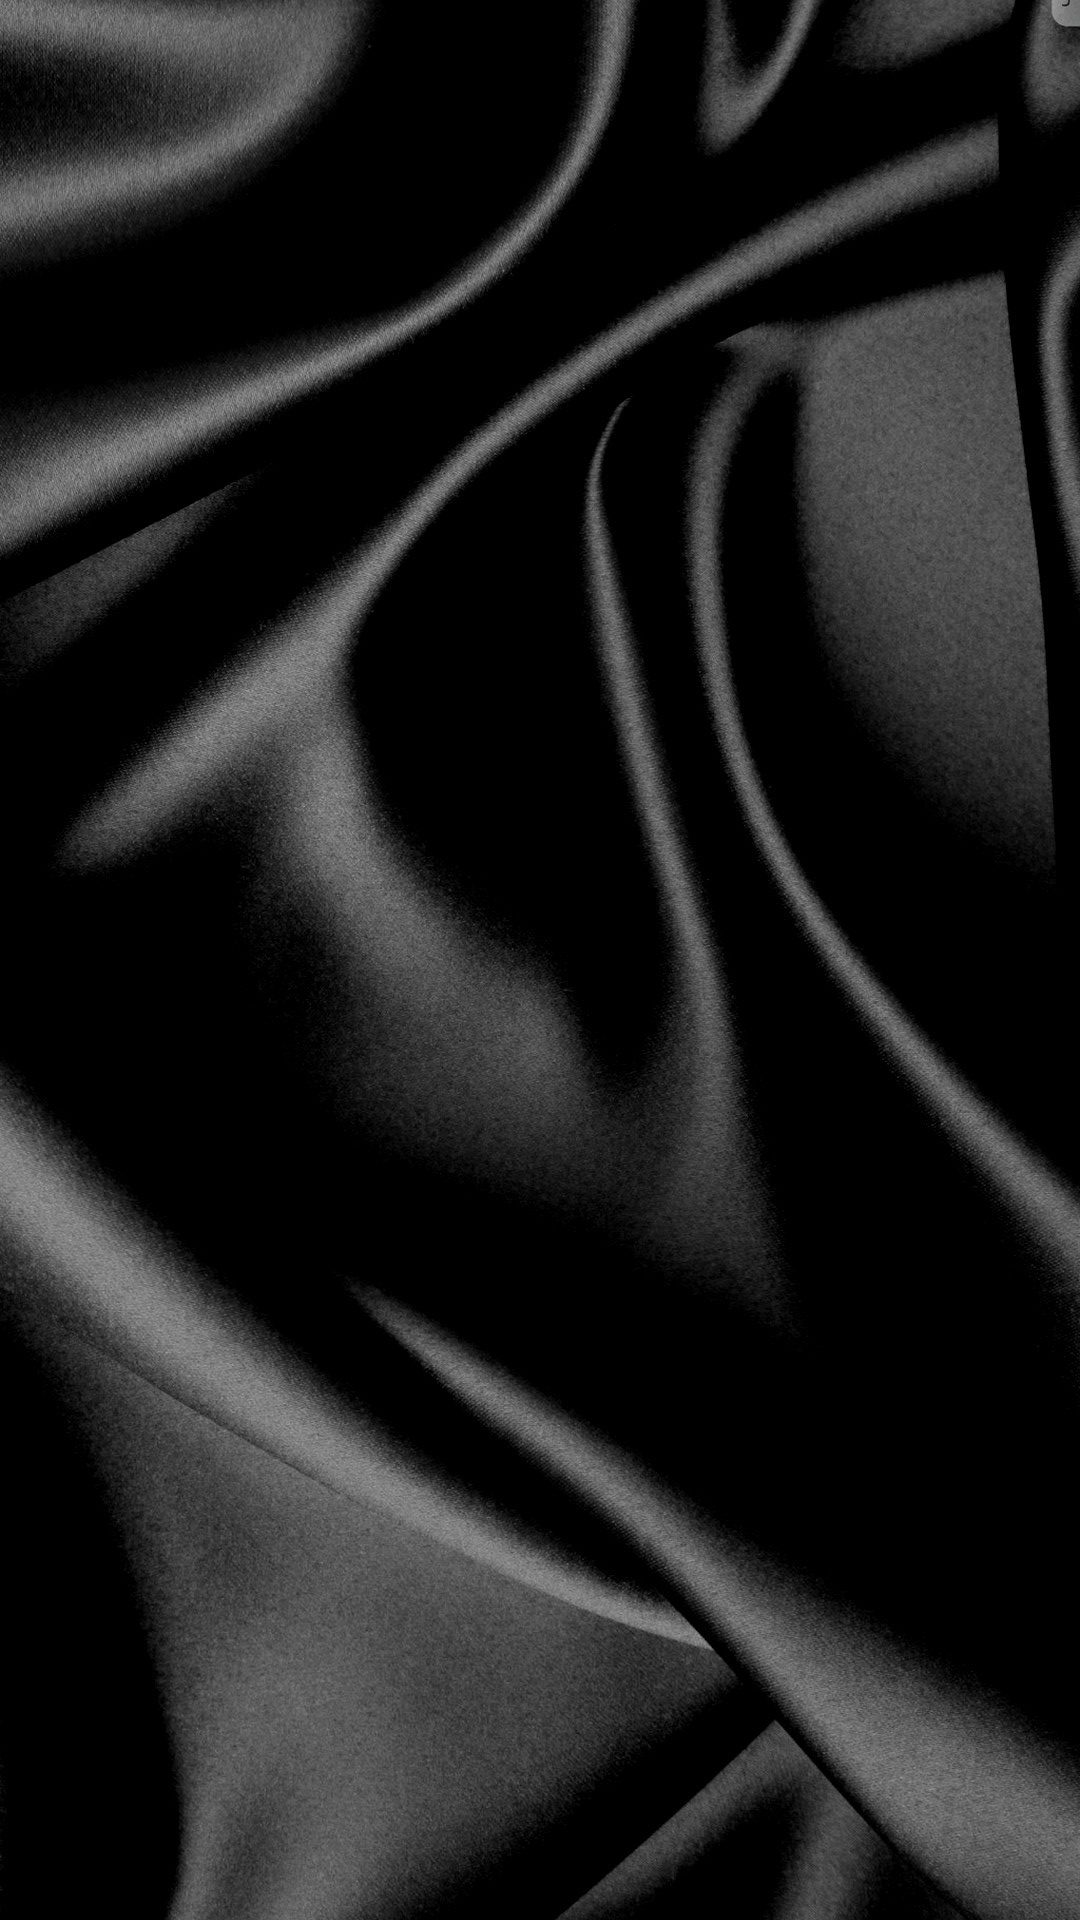 Black Silk Backgrounds For Android With high-resolution 1920X1080 pixel. You can use this wallpaper for your Android backgrounds, Tablet, Samsung Screensavers, Mobile Phone Lock Screen and another Smartphones device